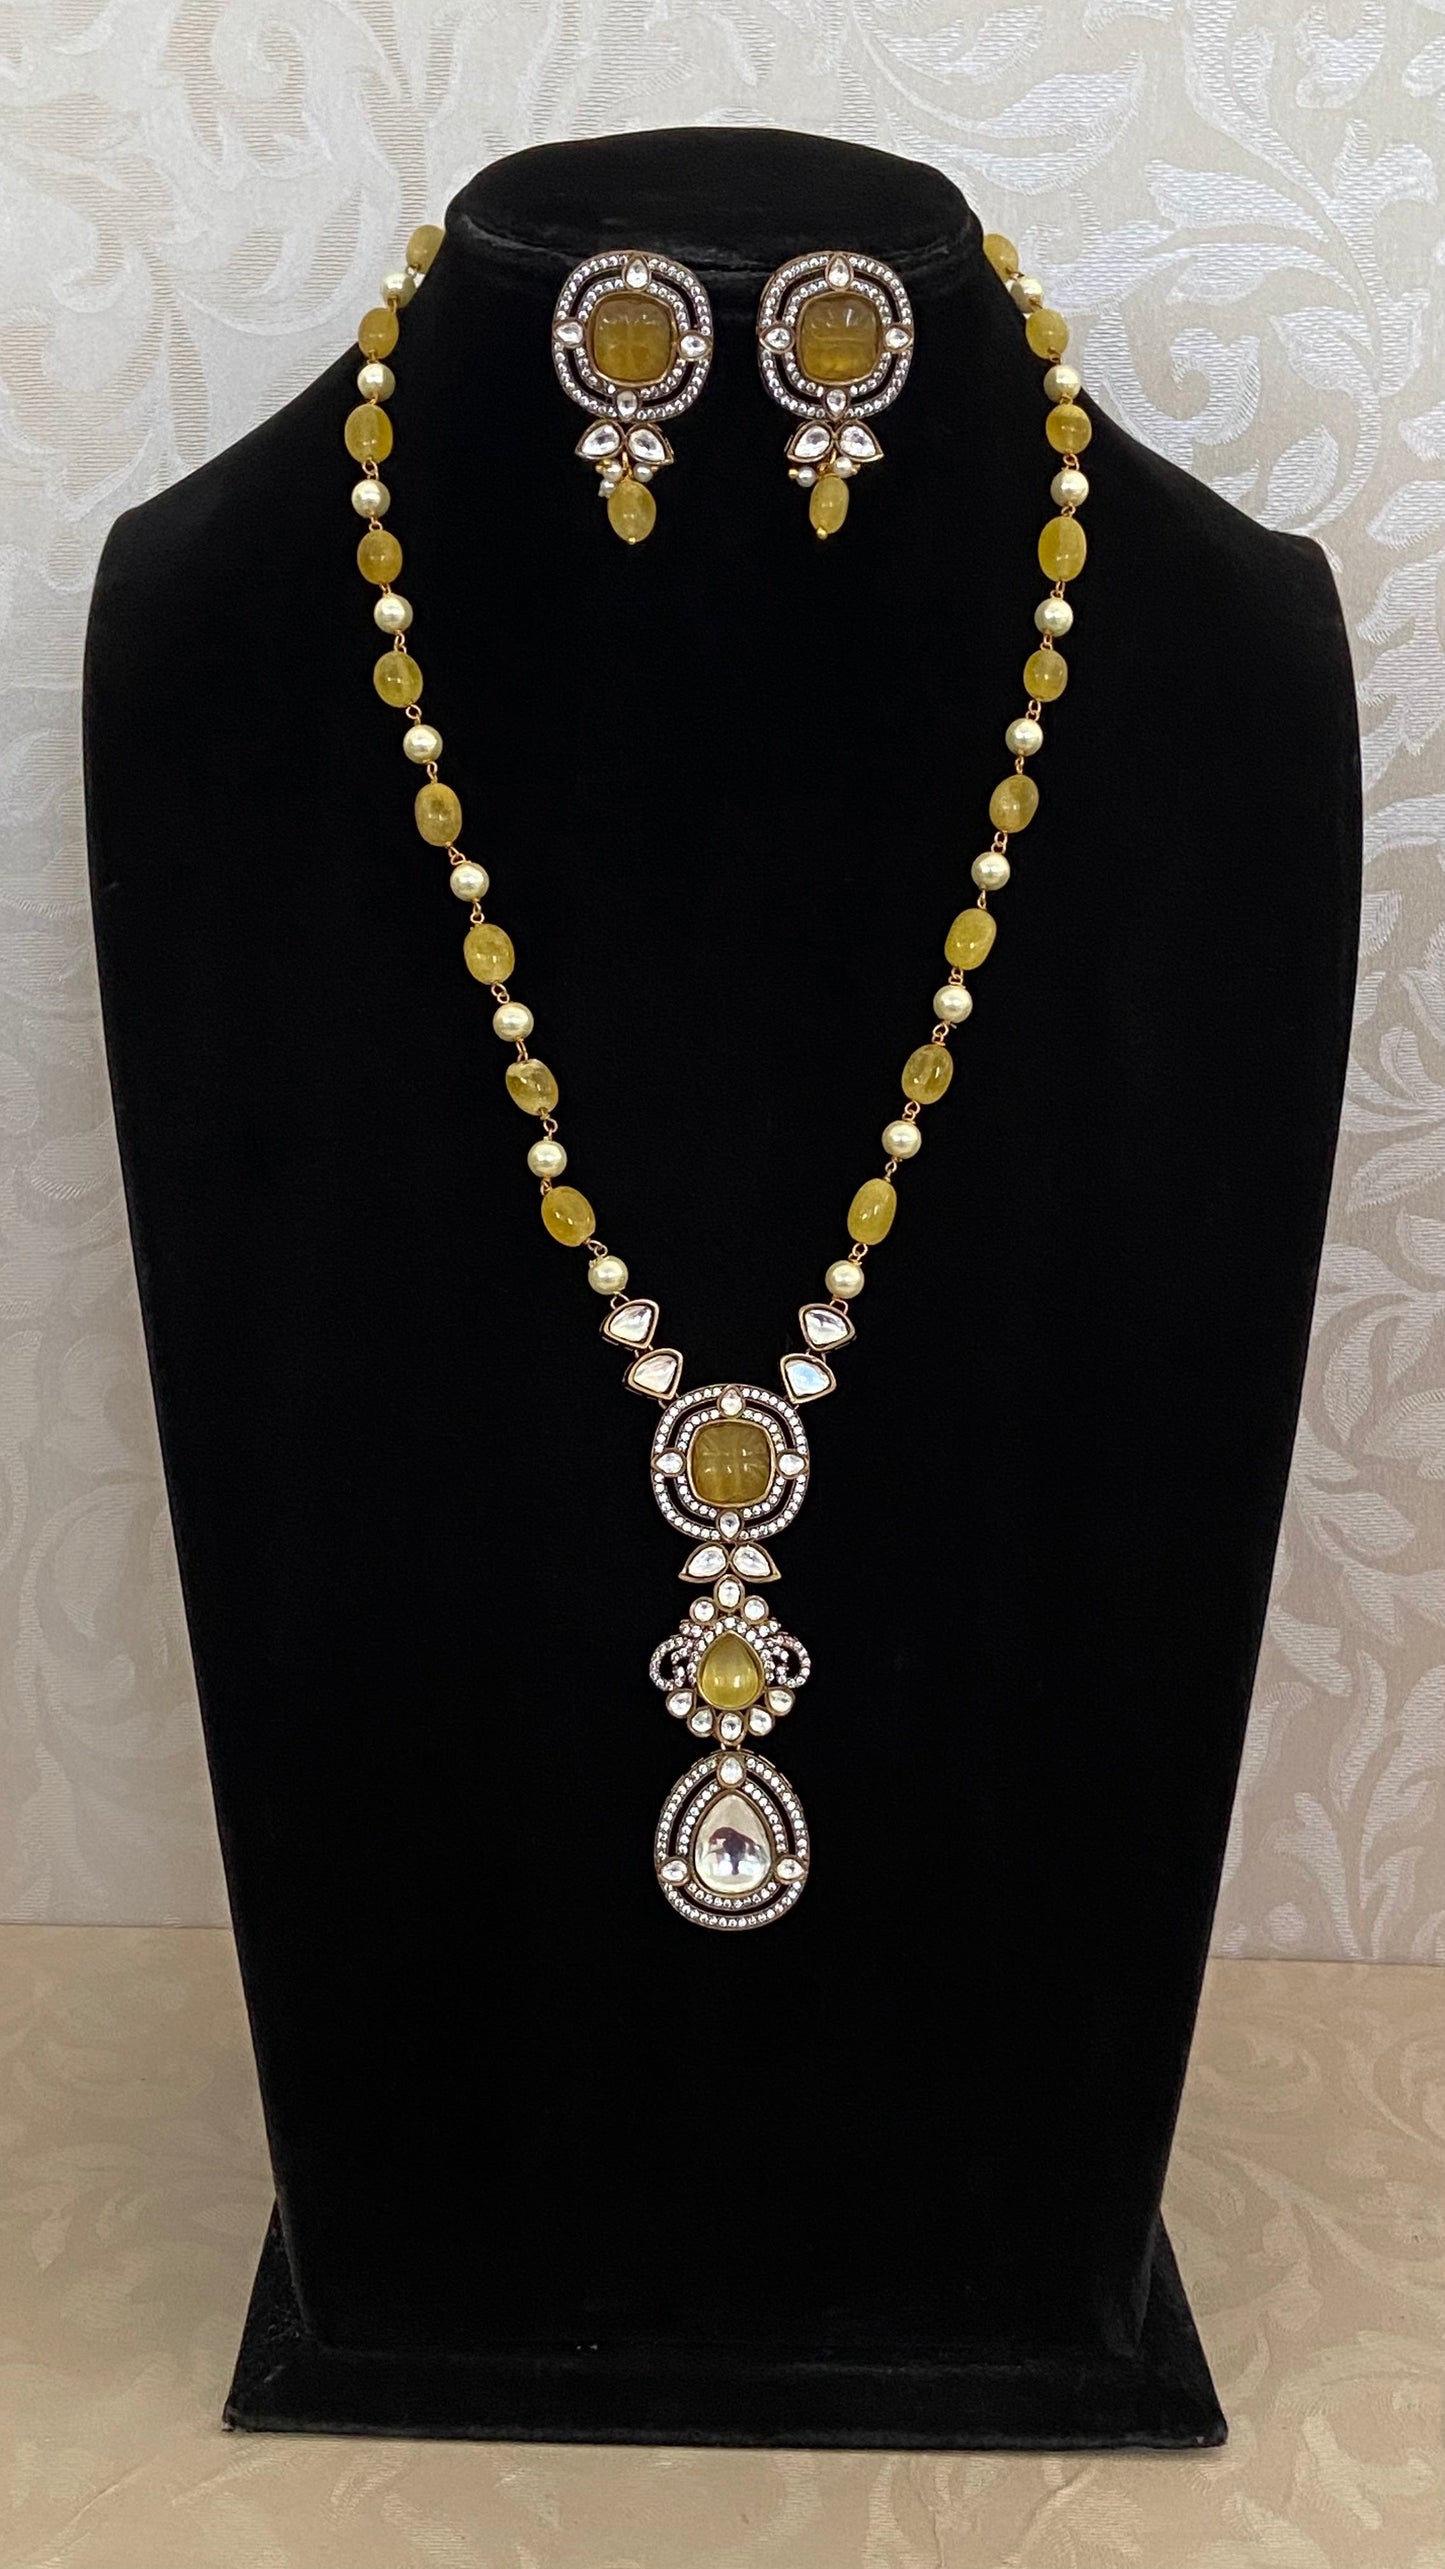 Exclusive necklace/ statement necklace